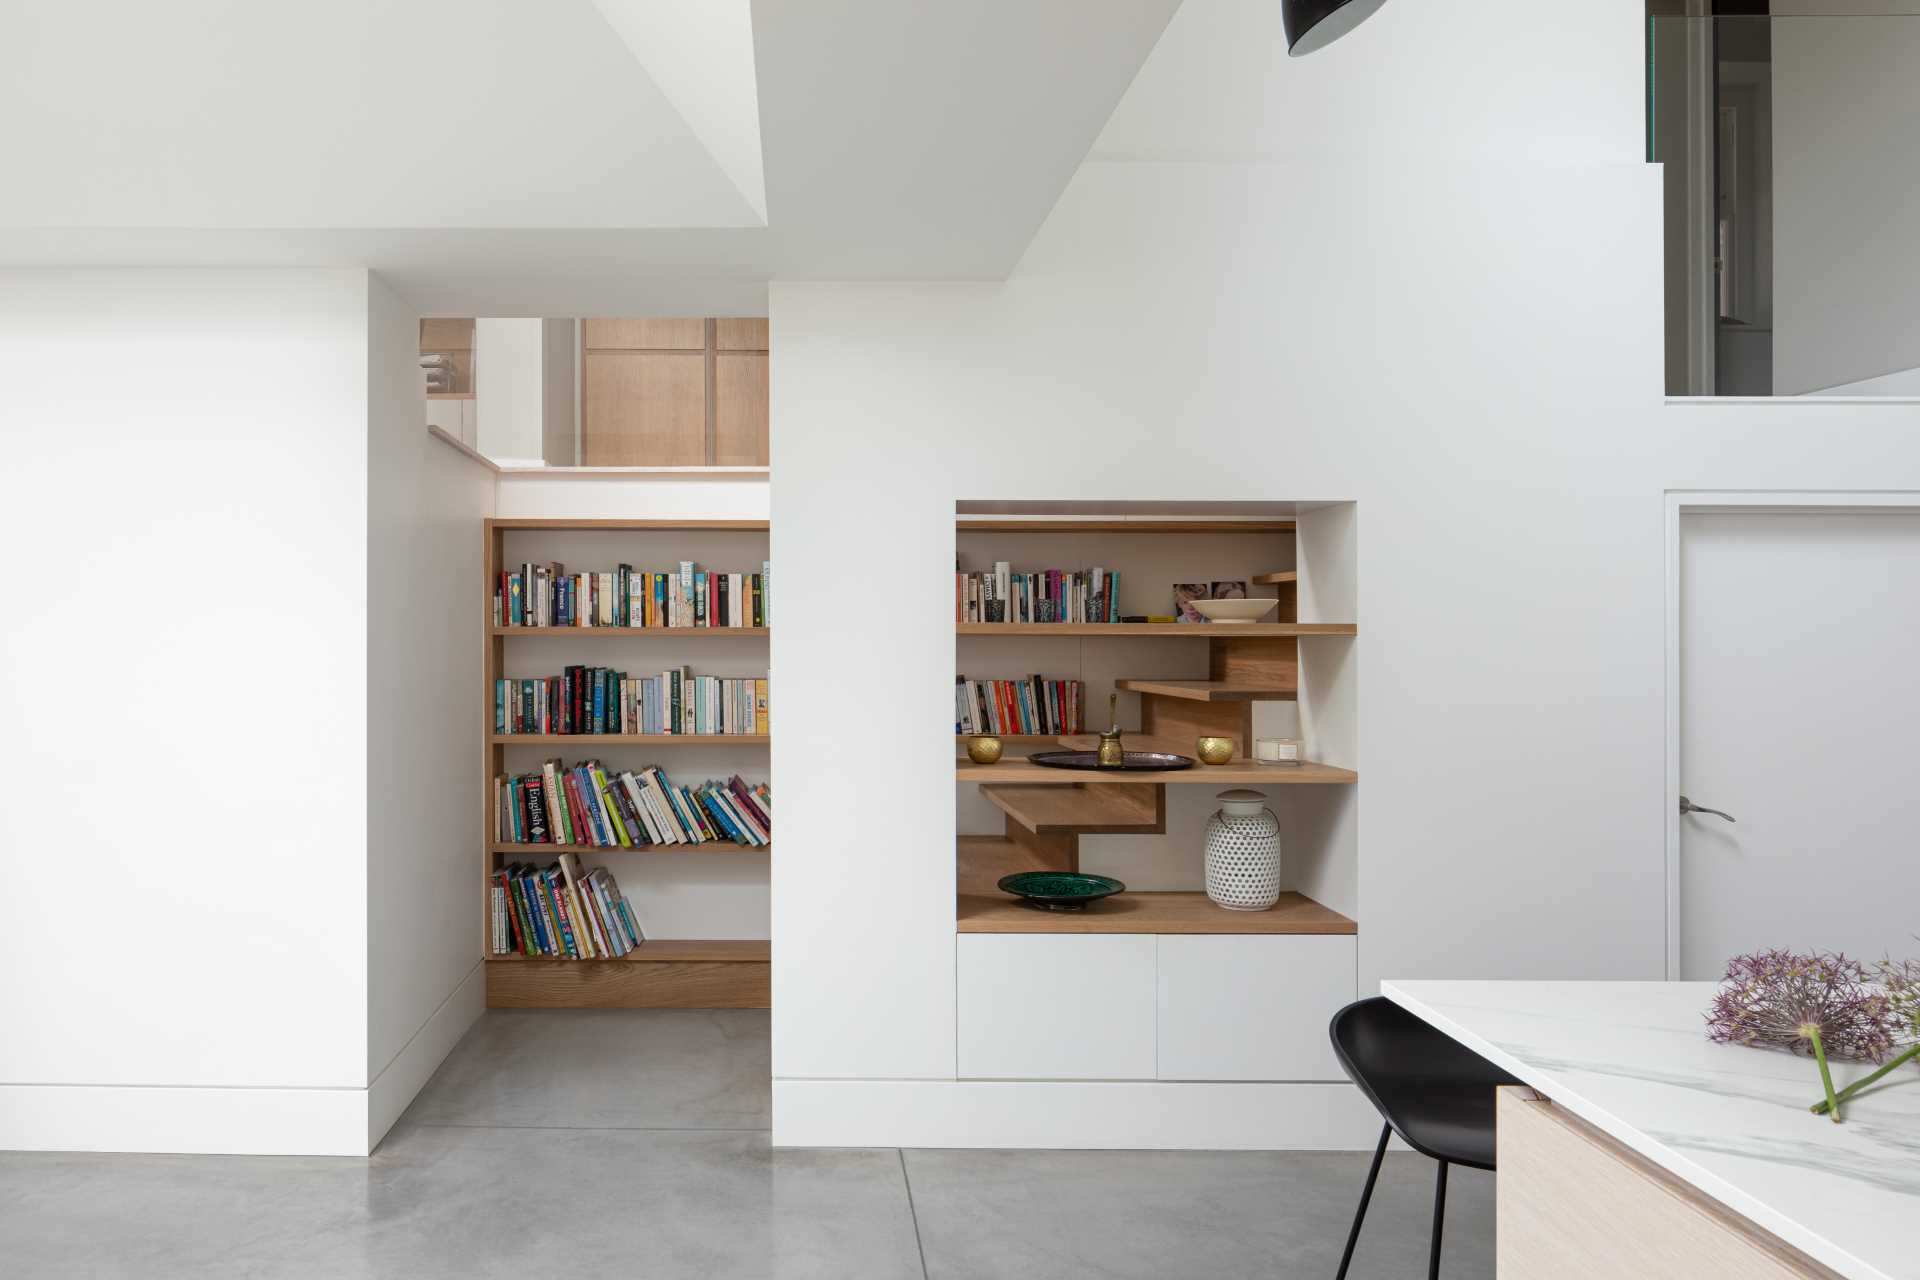 A wood bookshelf is positioned along the stairs, while a small cut-out has matching wood shelves.